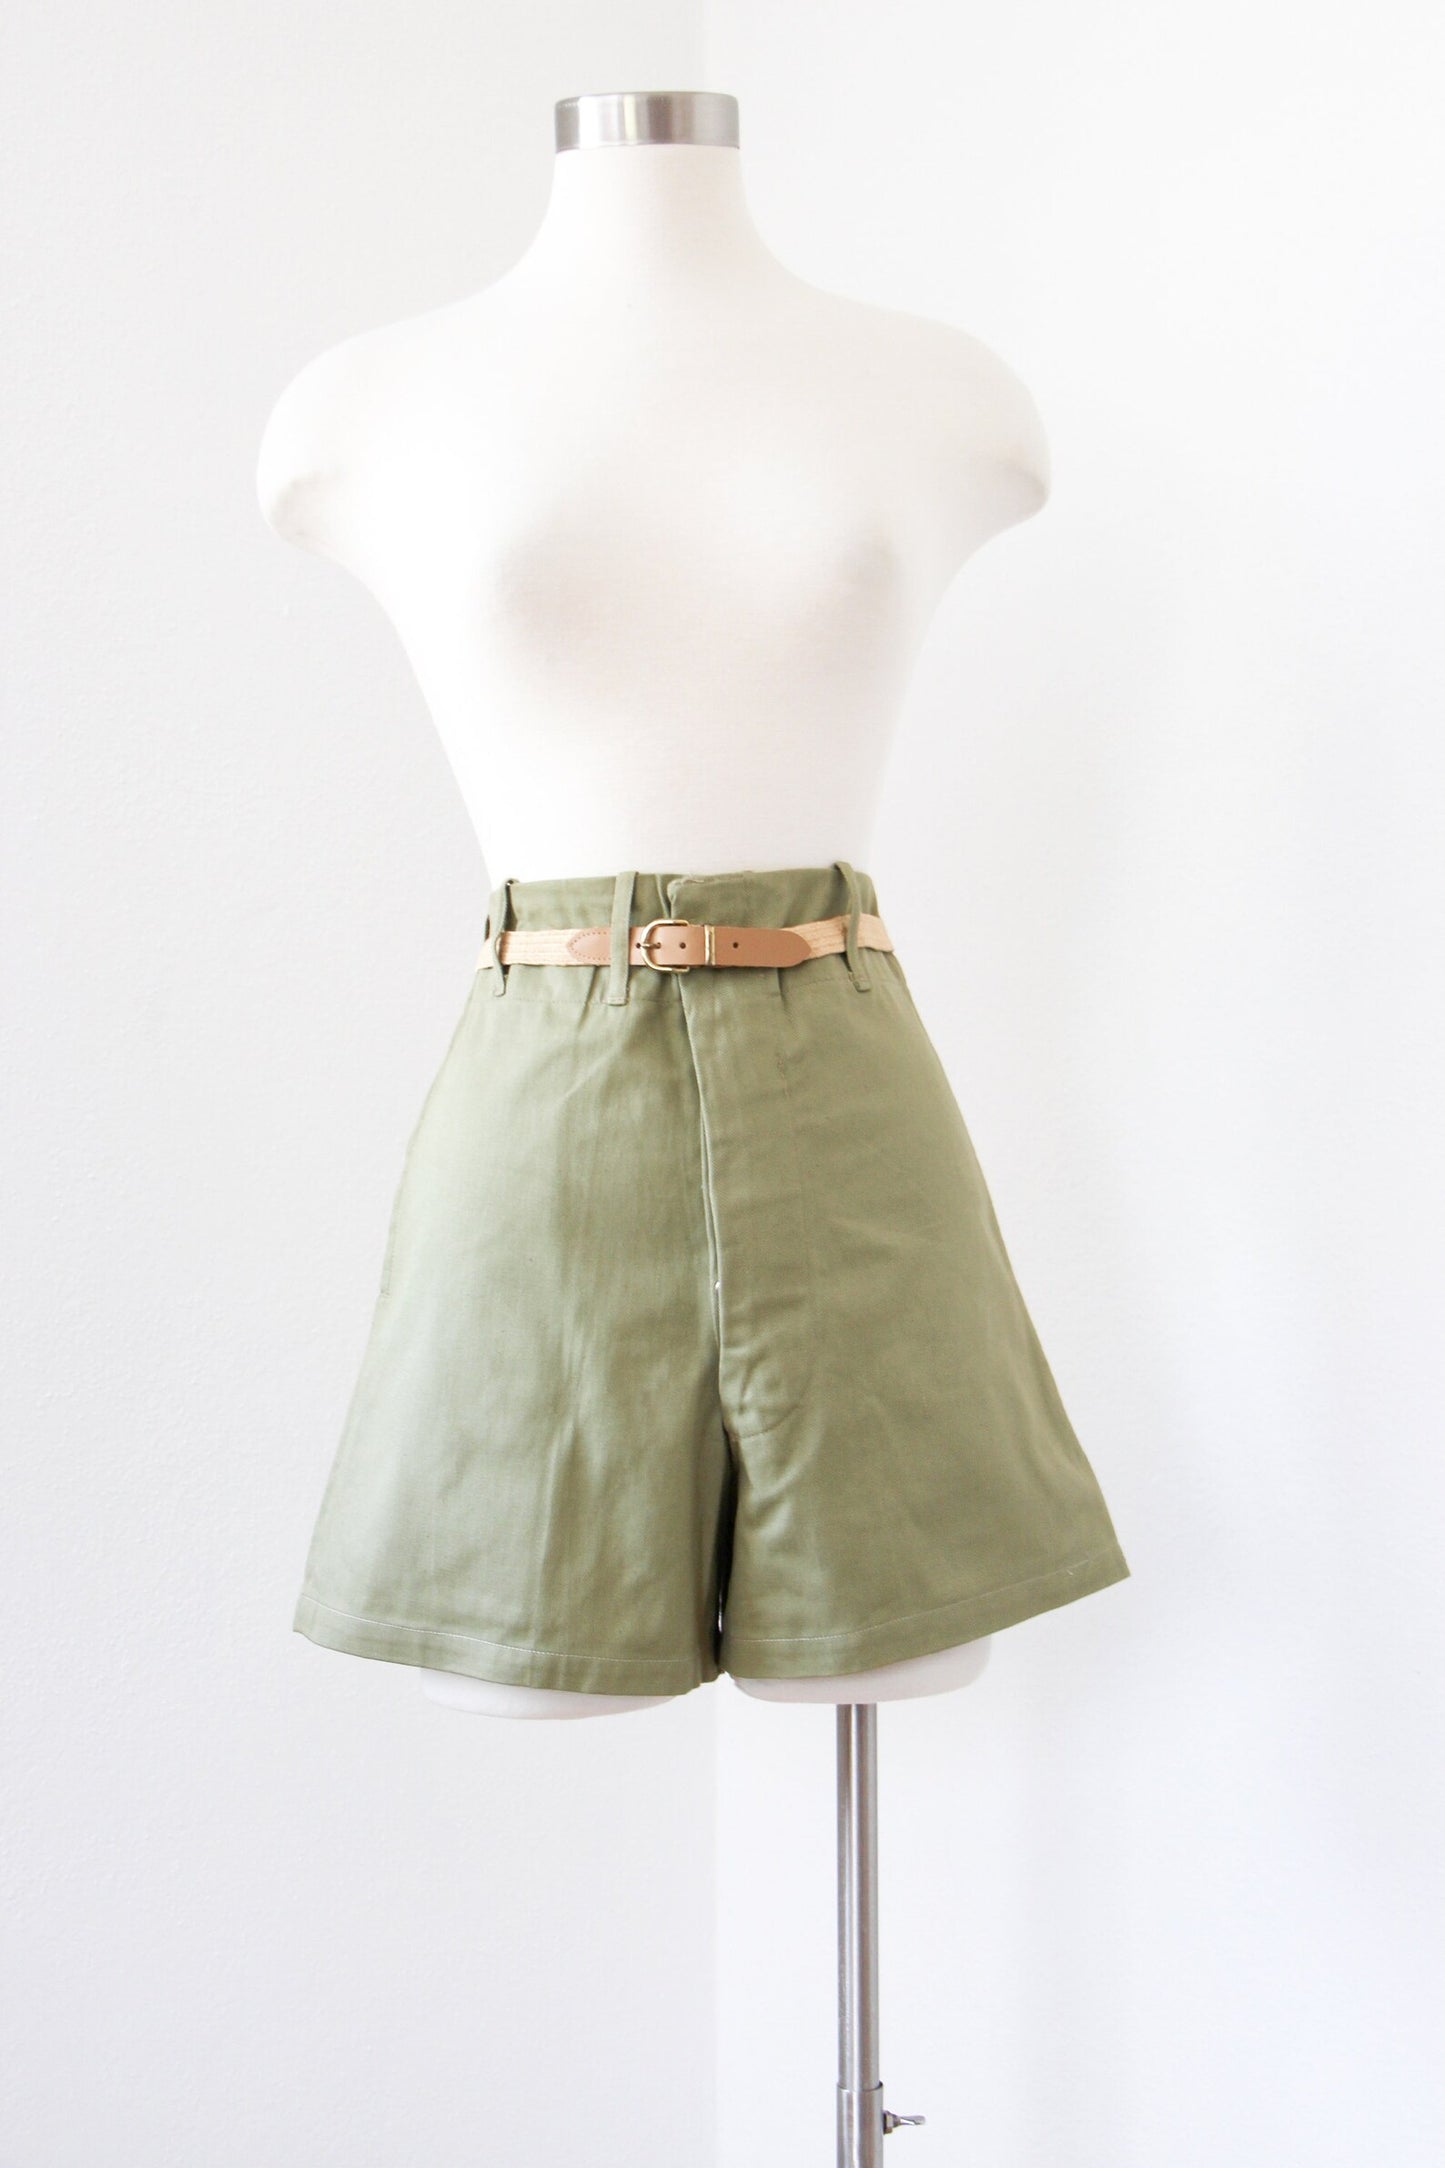 RARE WWII 1940s Canadian Army Olive Khaki Cotton Military Shorts w High Waist + Pockets! - Choose Your Size